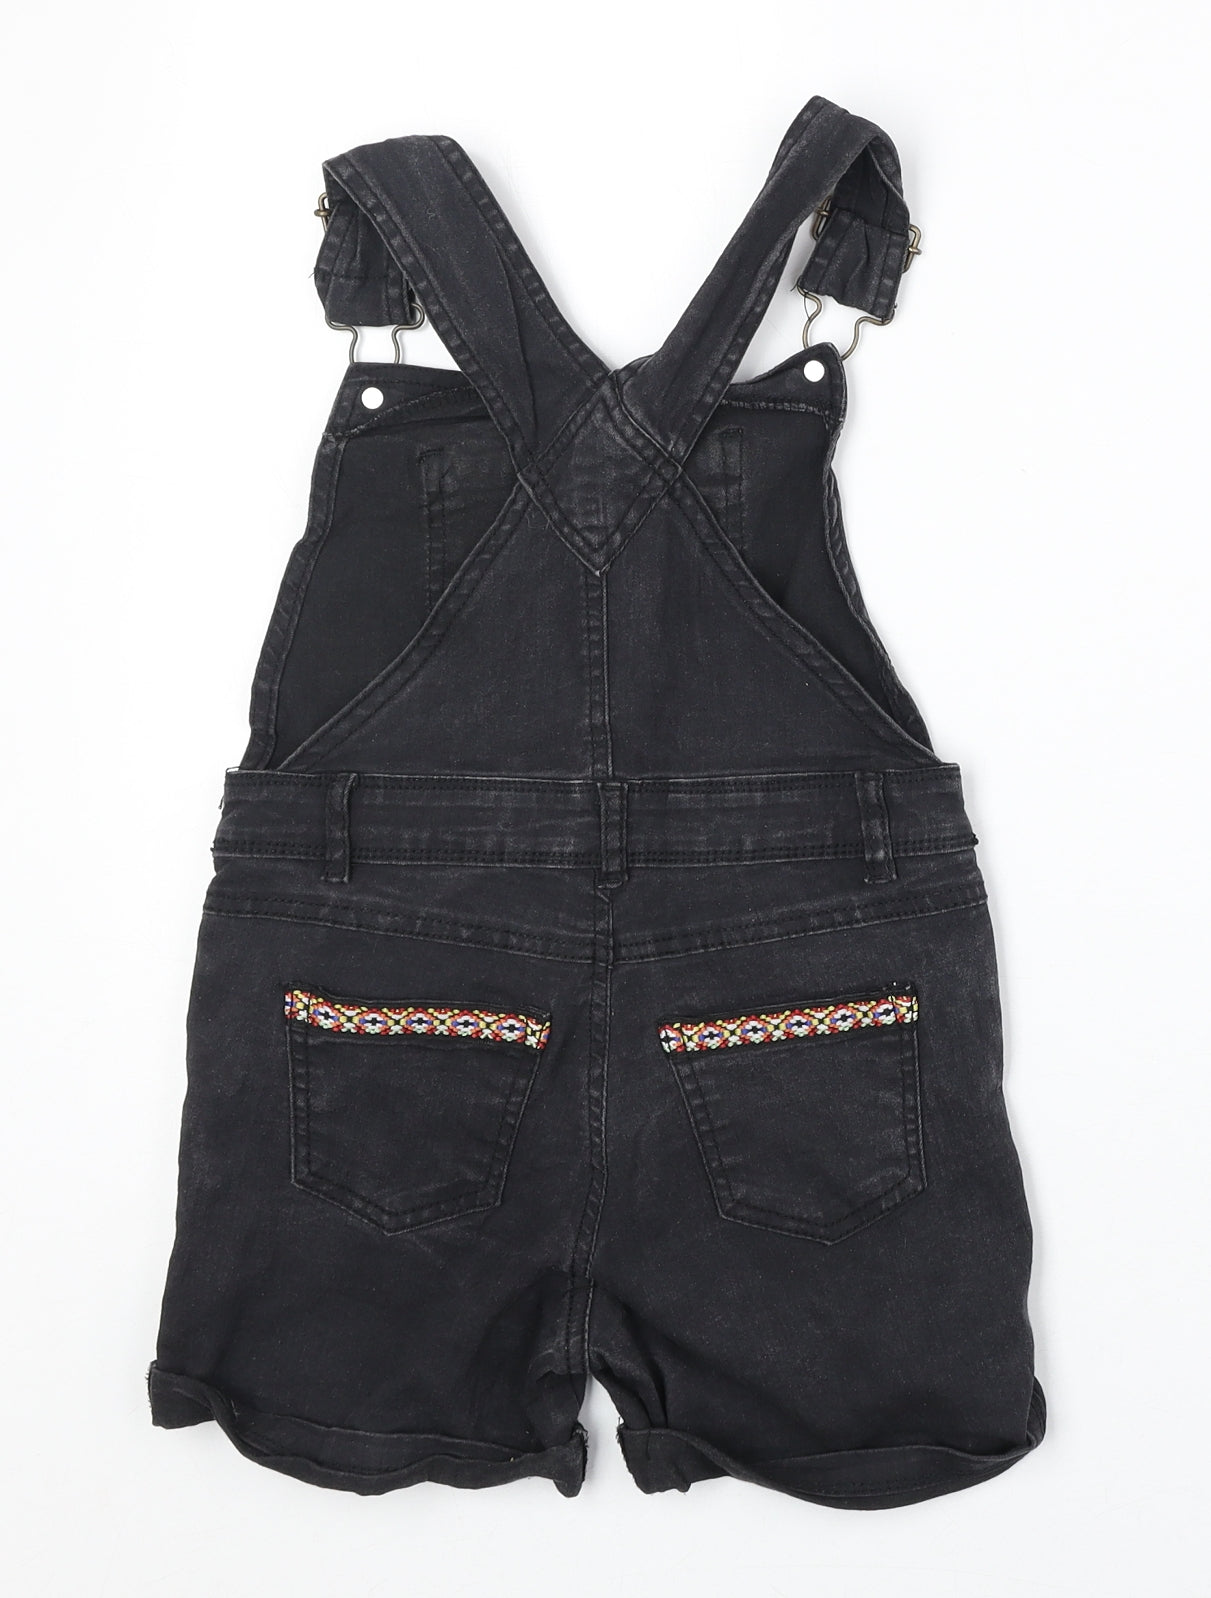 Pep&Co Girls Black Cotton Dungaree One-Piece Size 7-8 Years Buckle